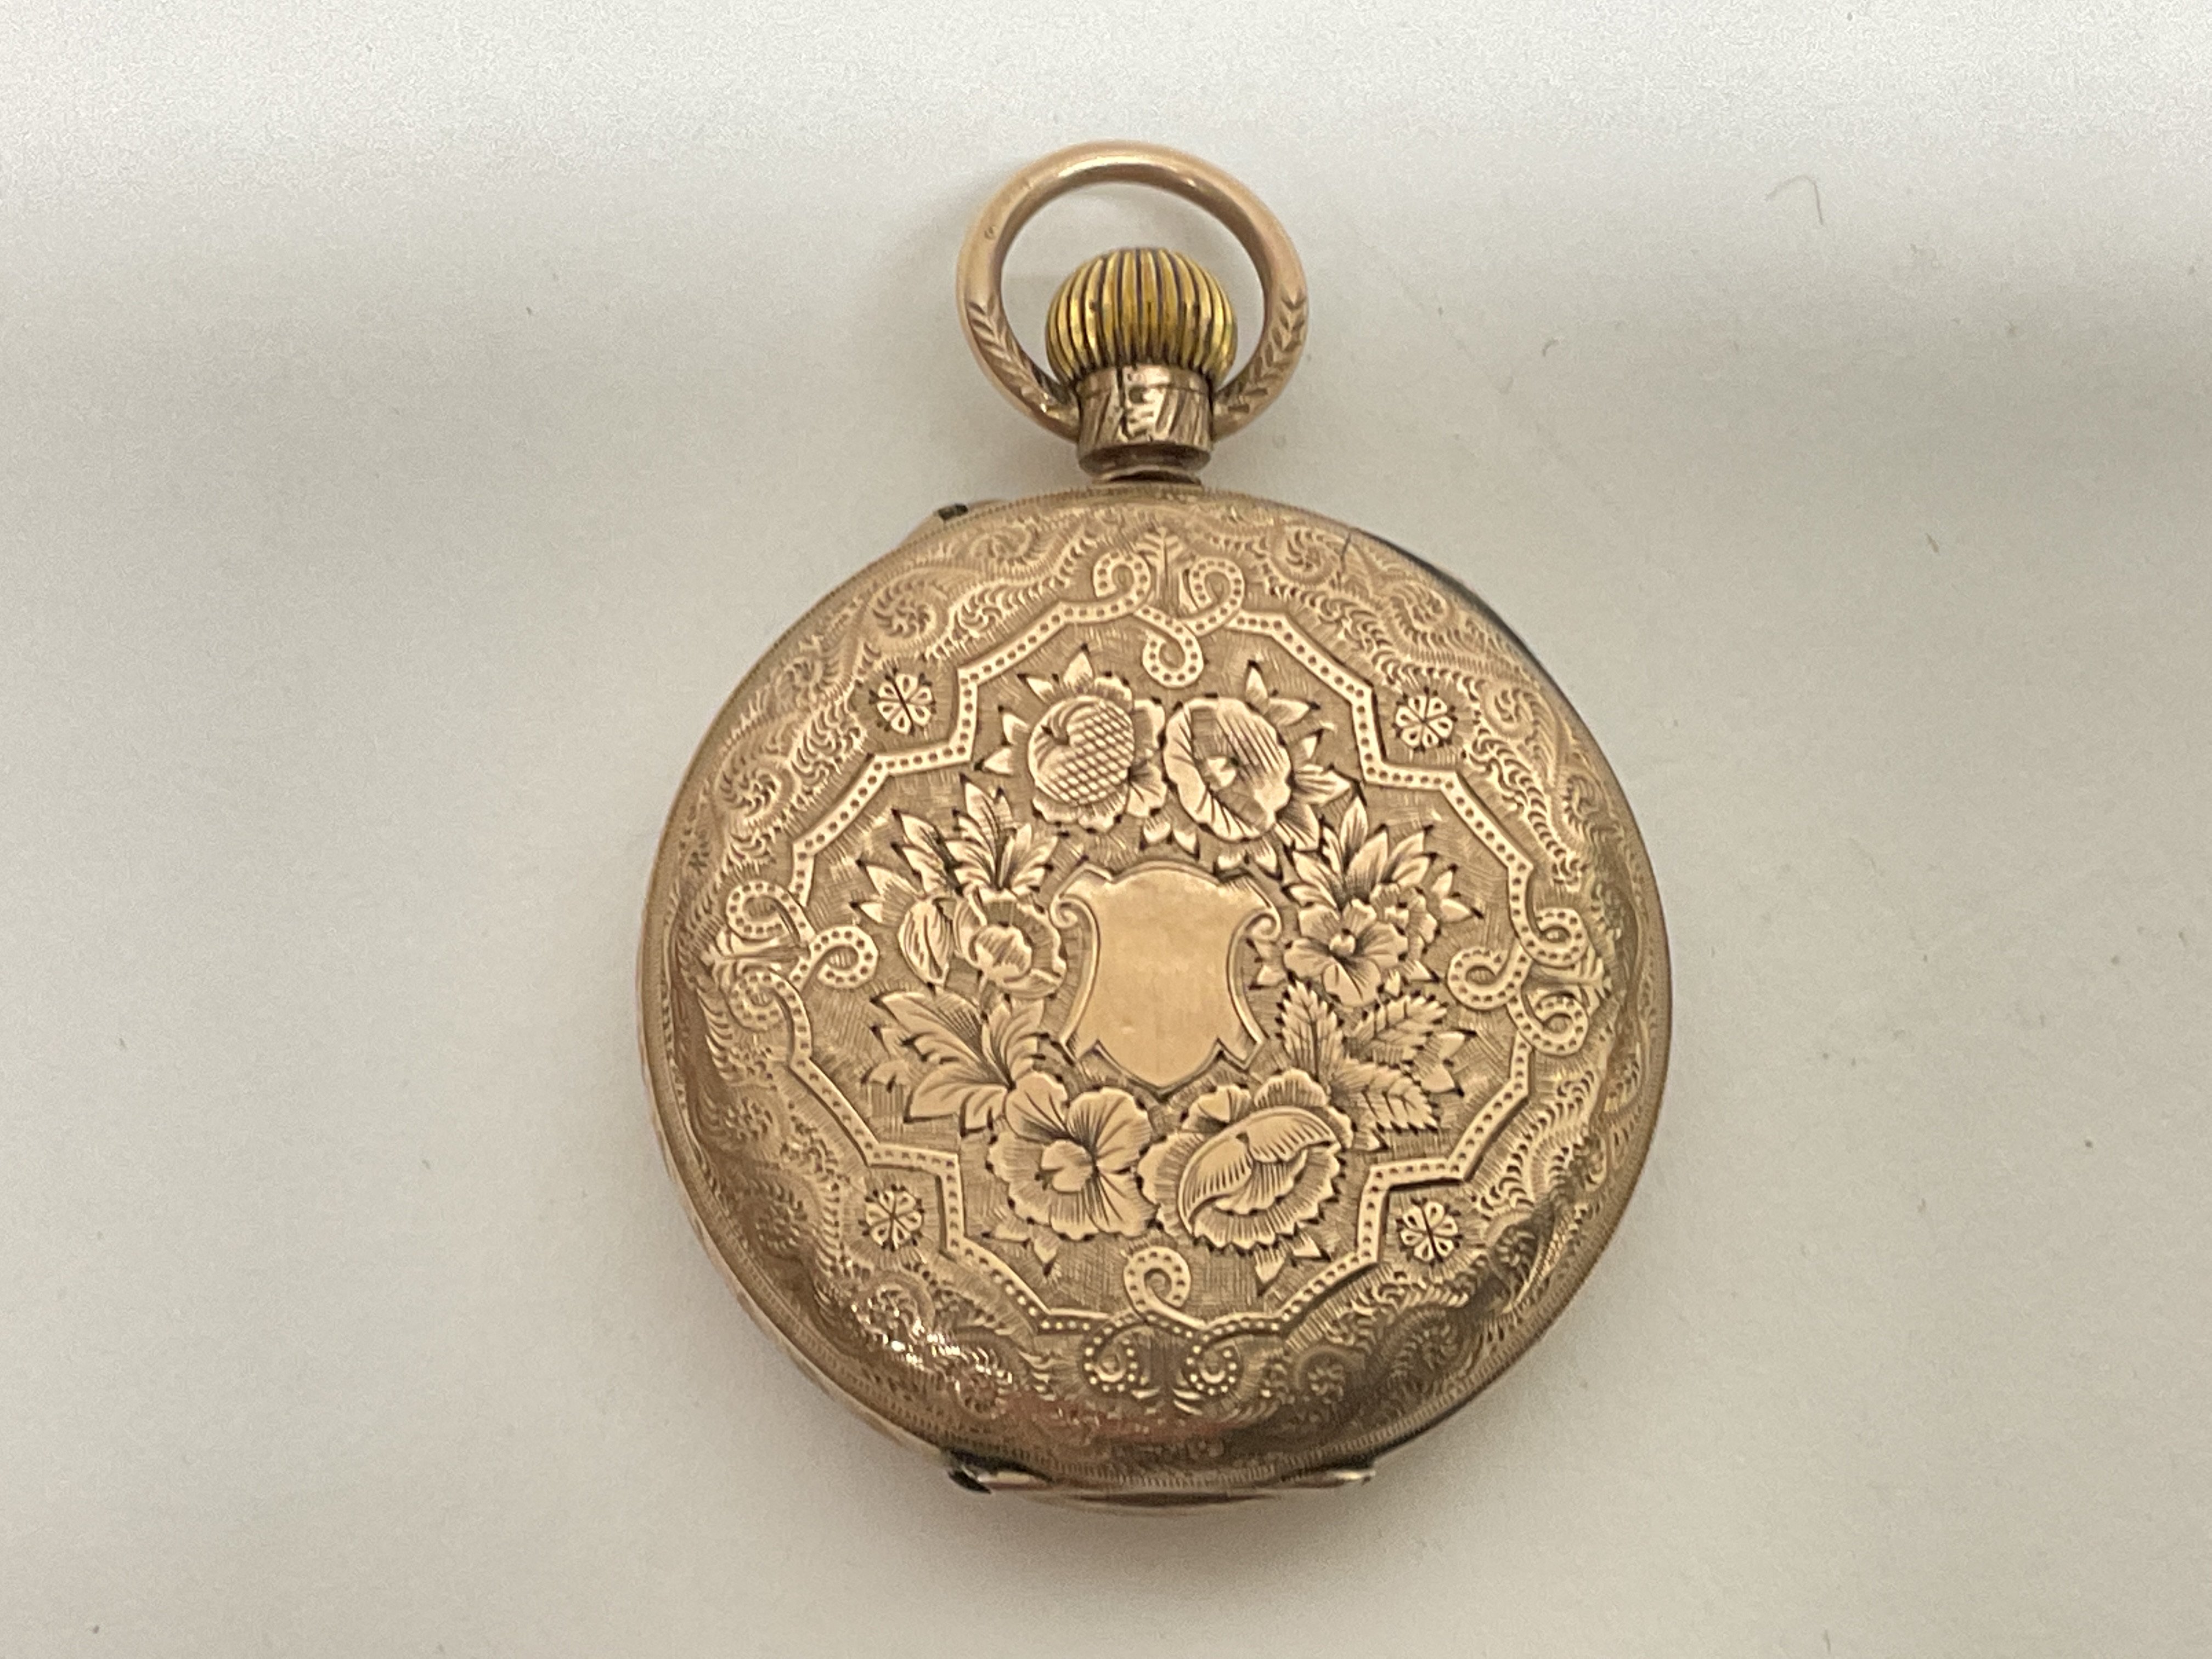 9ct cased ladies fob watch - Image 2 of 2